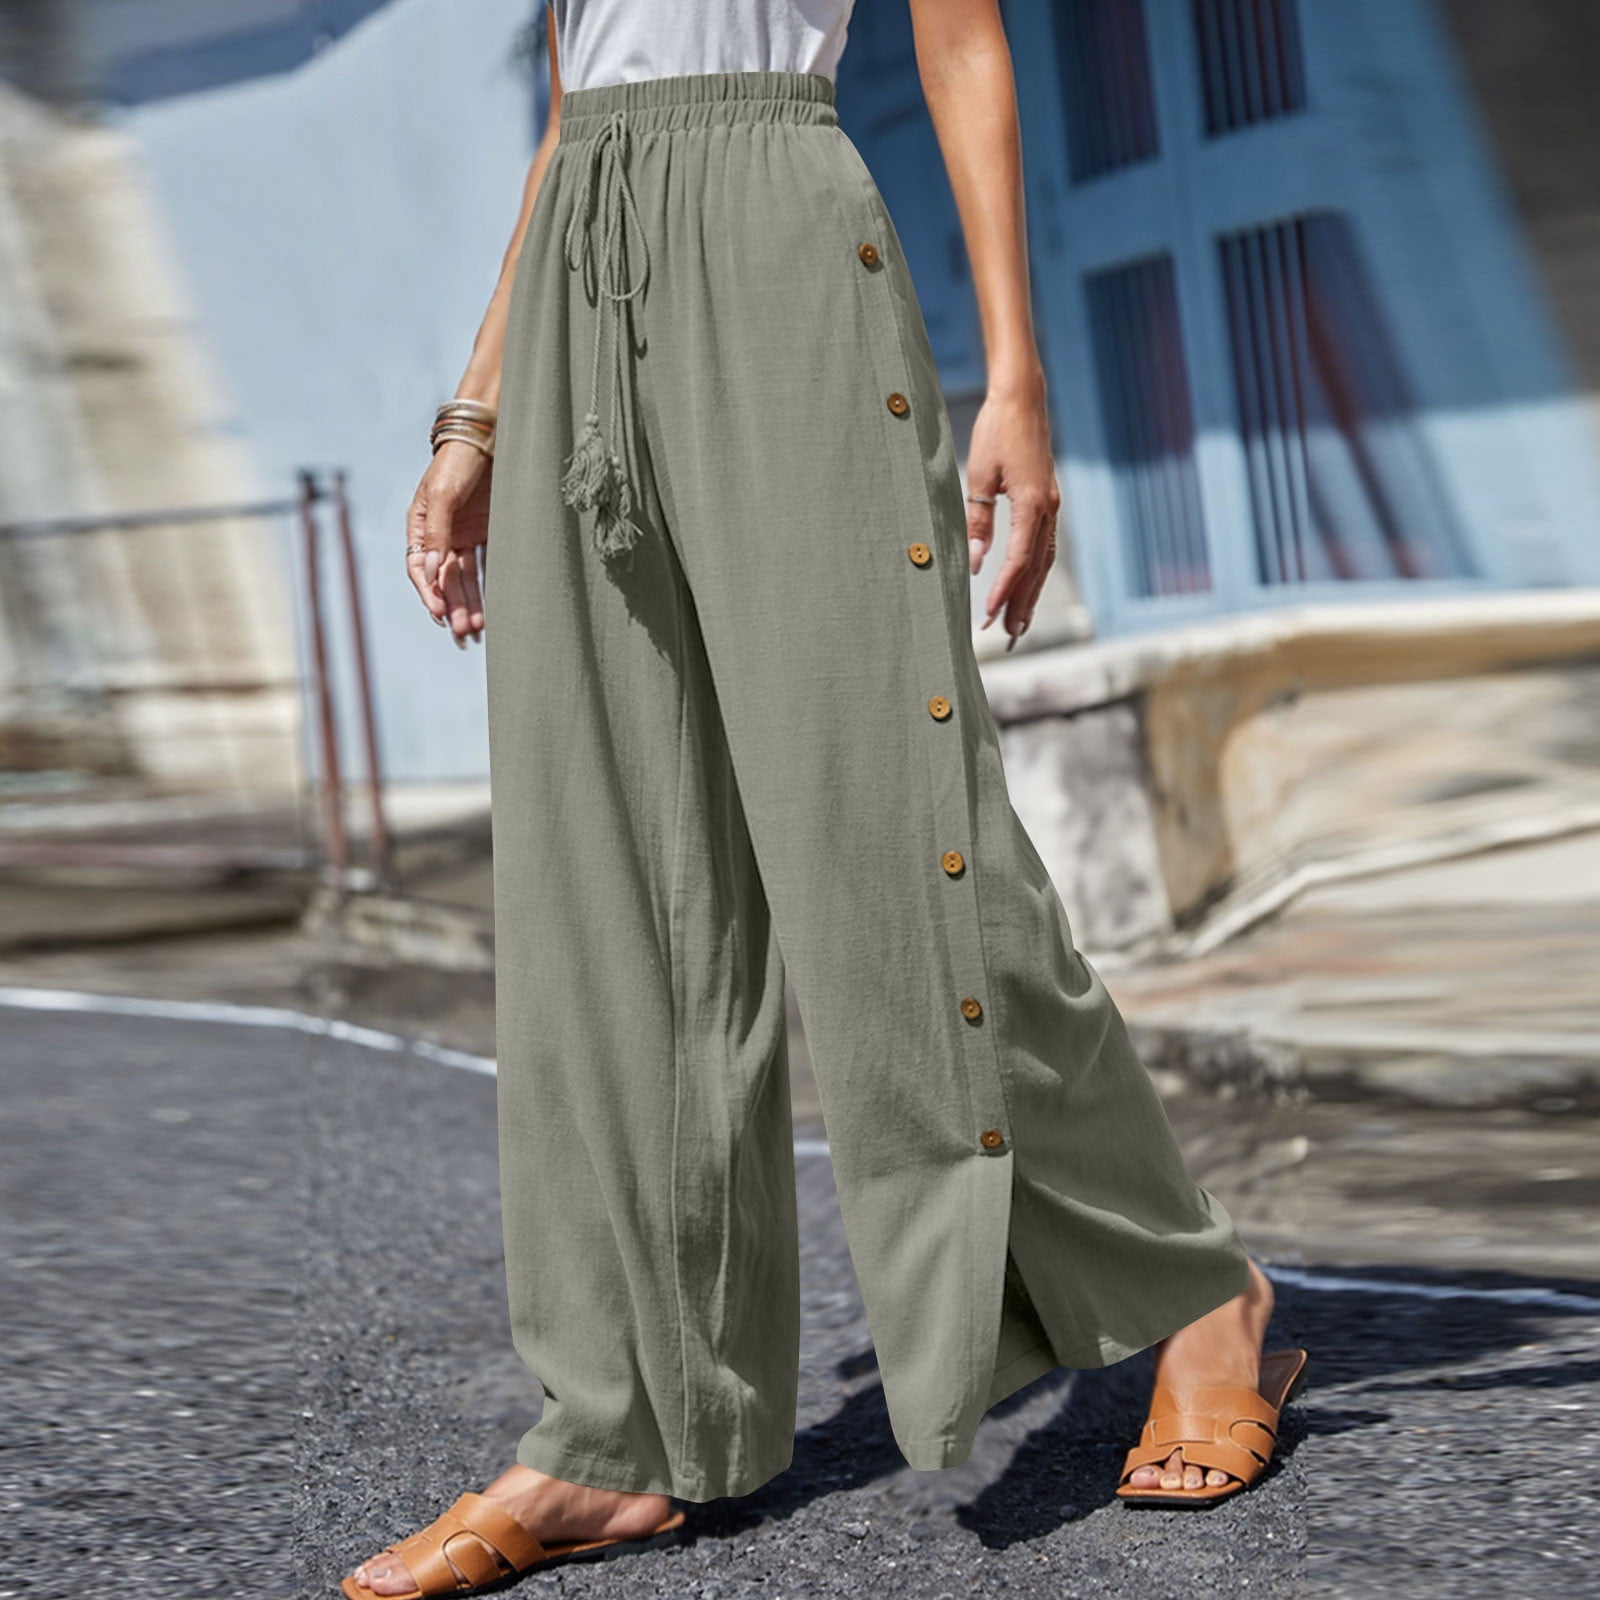 Buy Khaki Trousers & Pants for Women by TRENDS Online | Ajio.com-hancorp34.com.vn